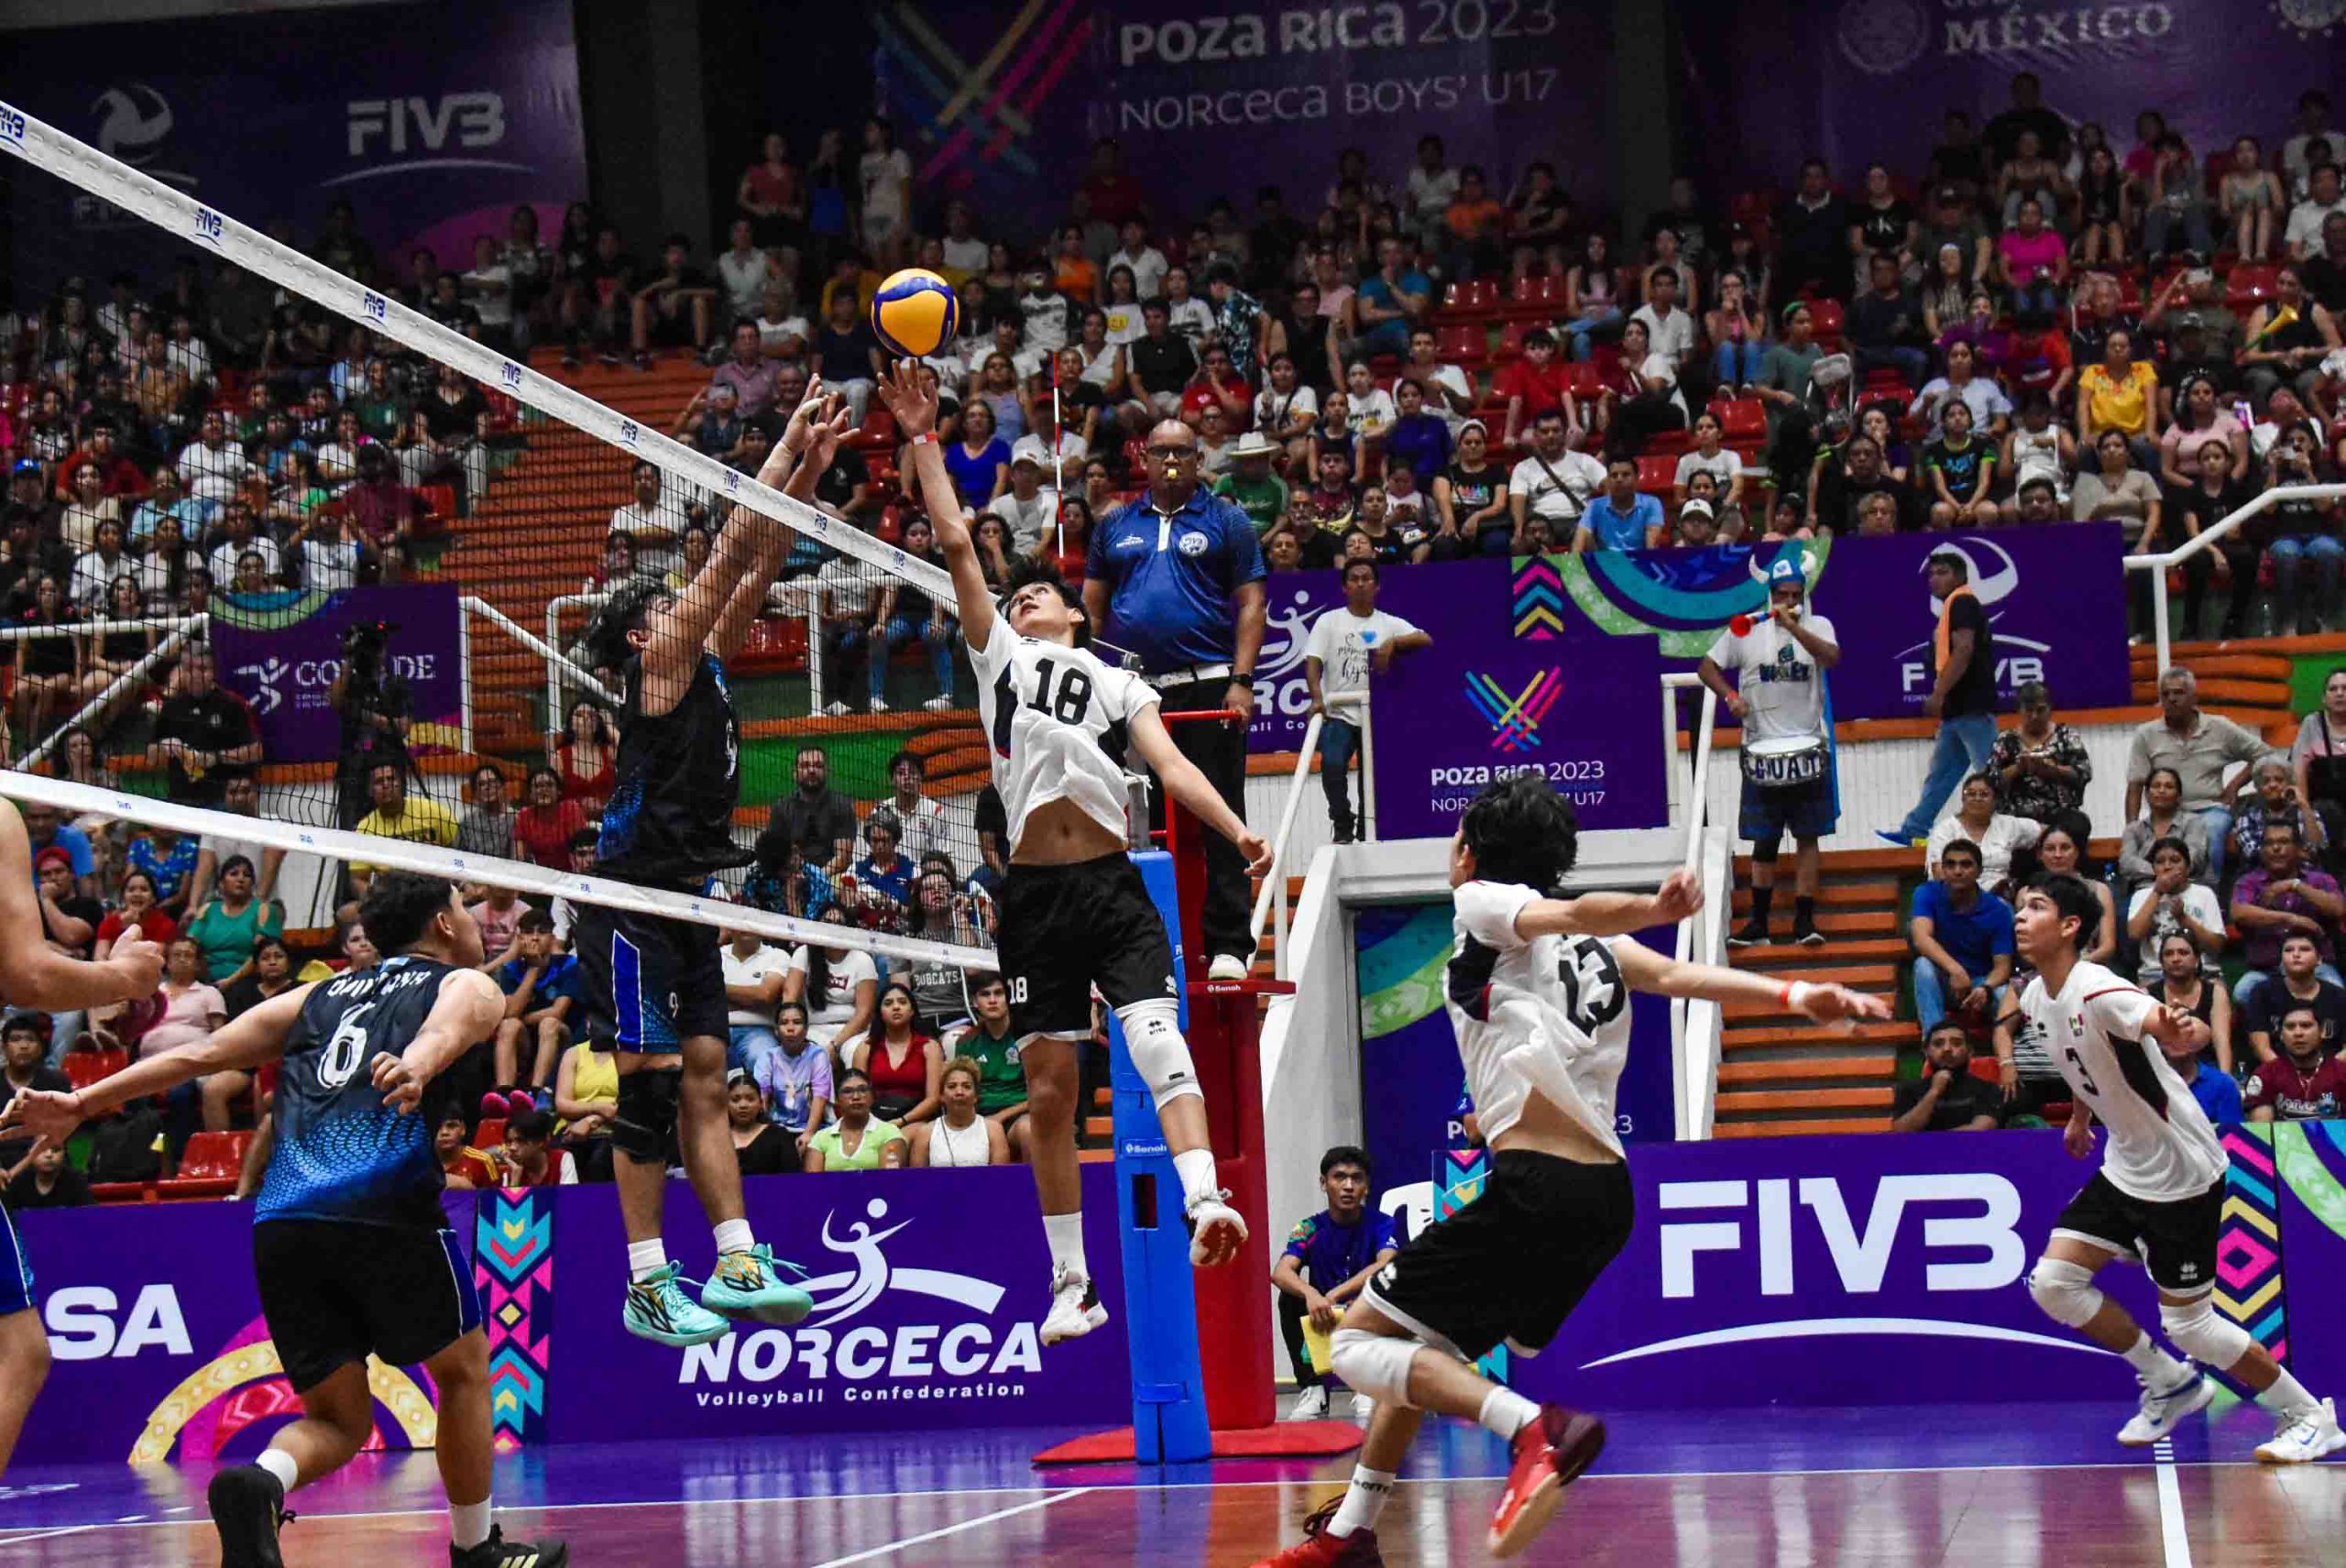 Mexico Wins Pool A undefeated; Costa Rica takes second place